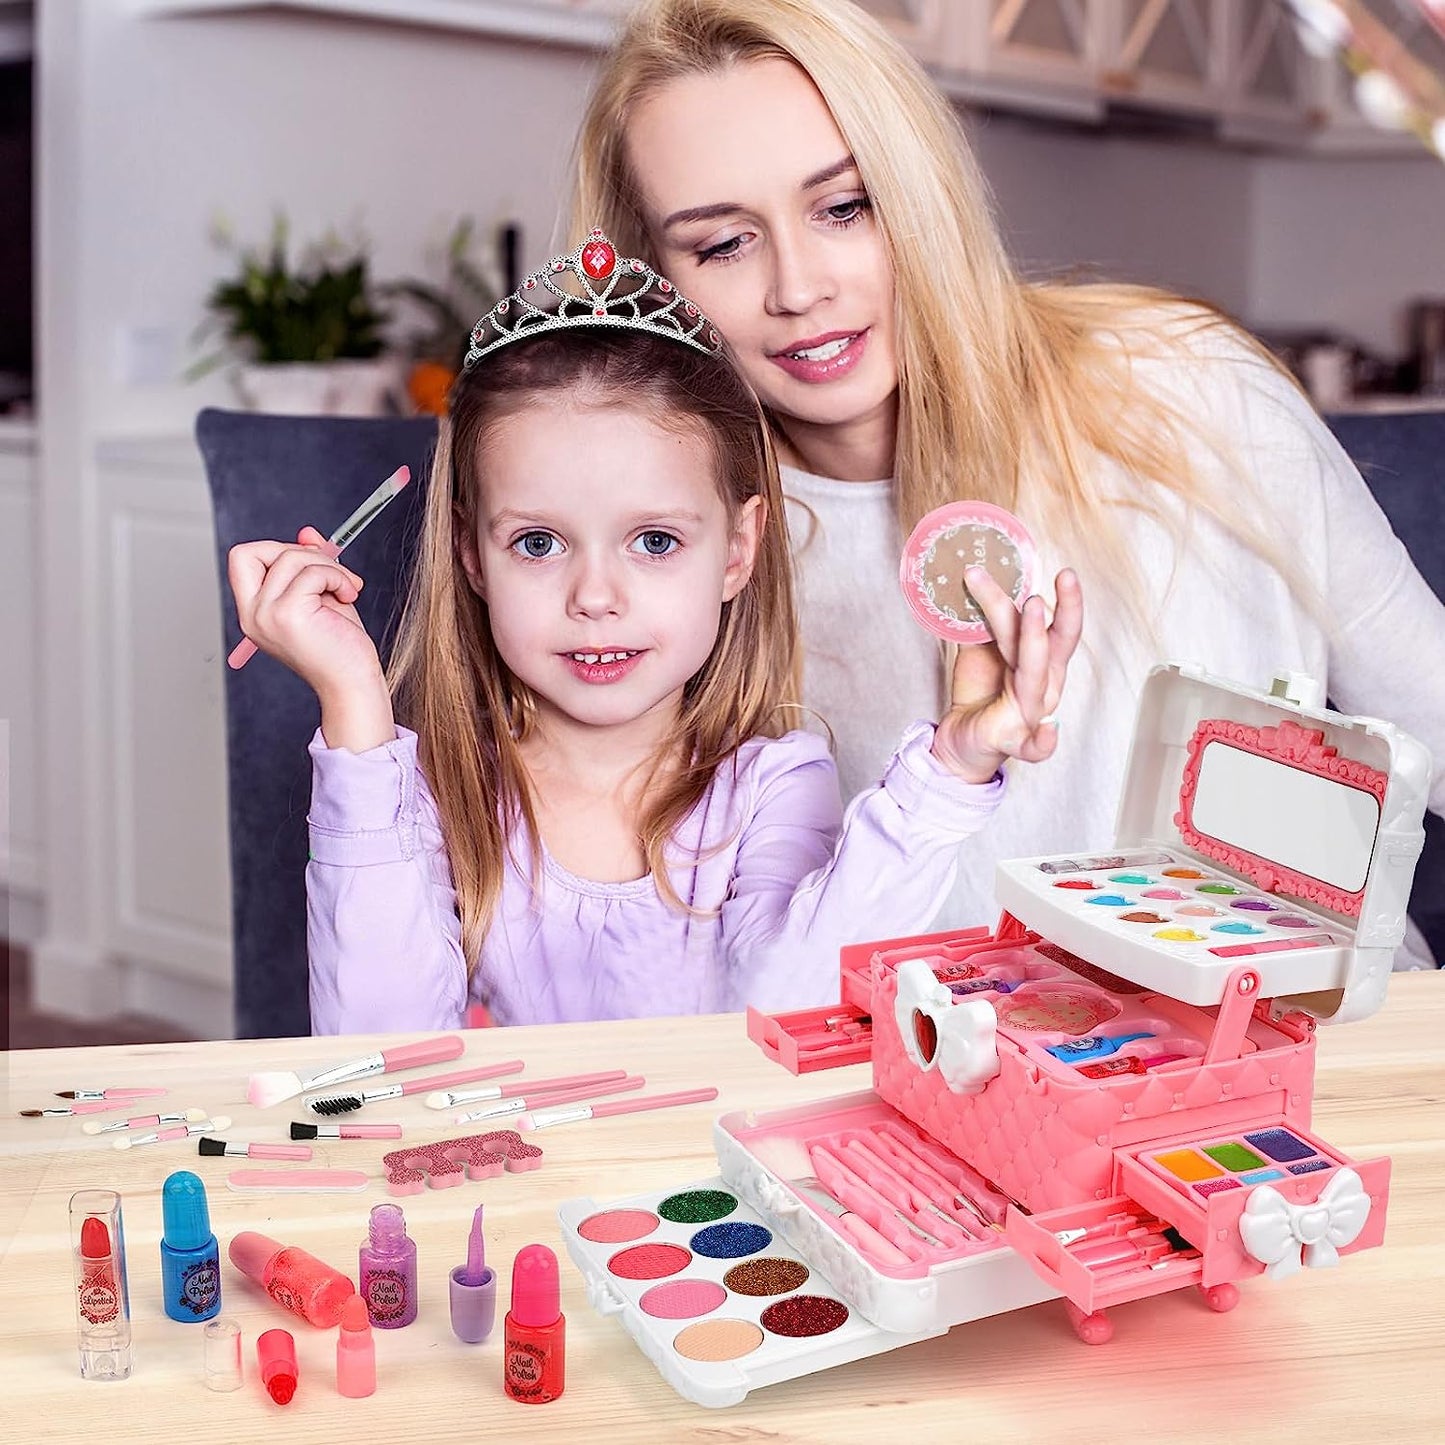 60-Piece Washable Kids Makeup Kit for Girls -Gift for Girls Ages 4-9